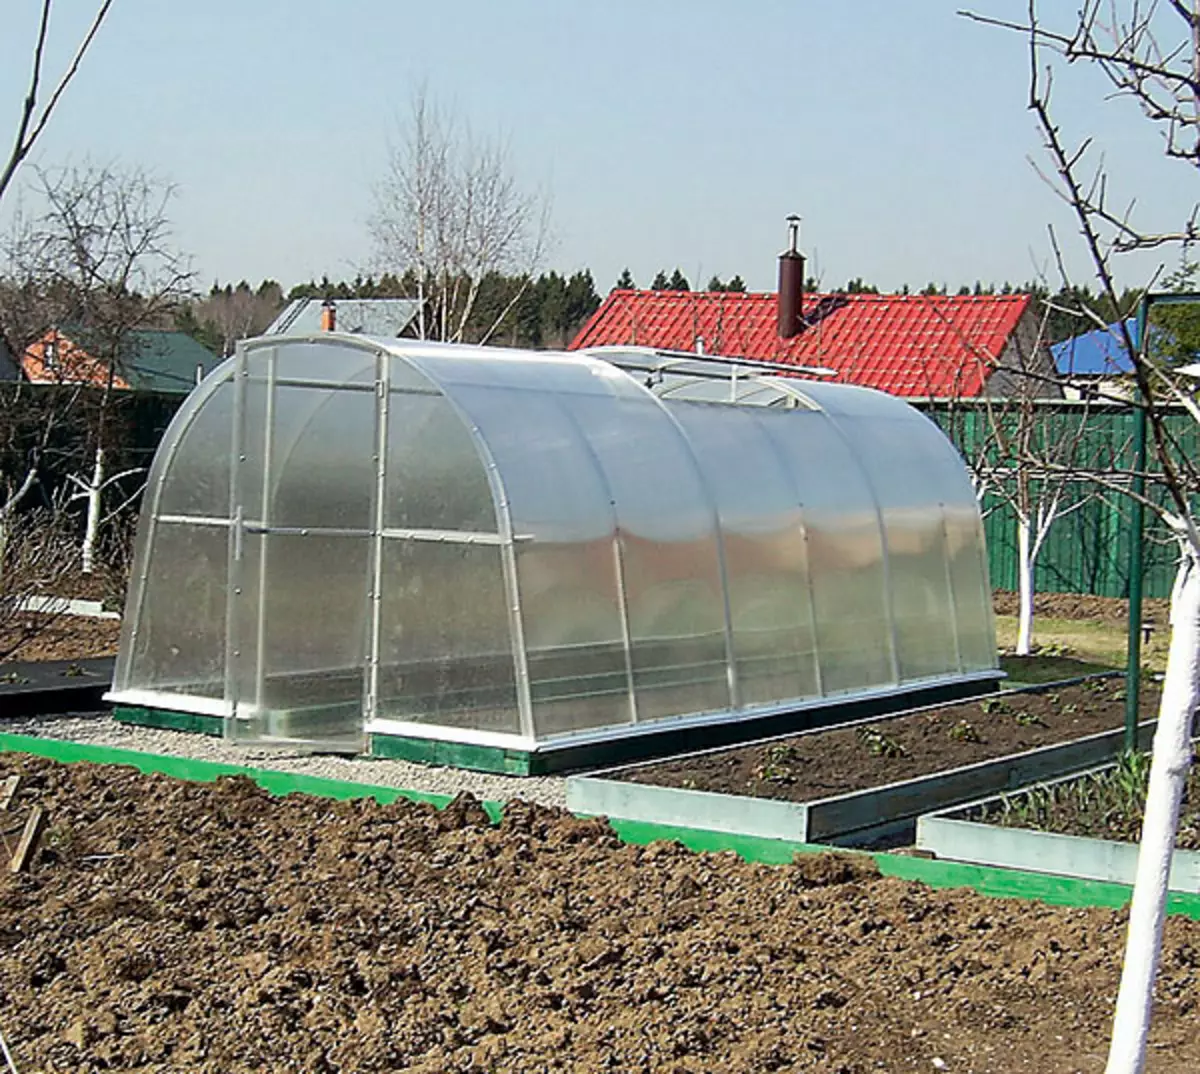 Greenhouse conditions